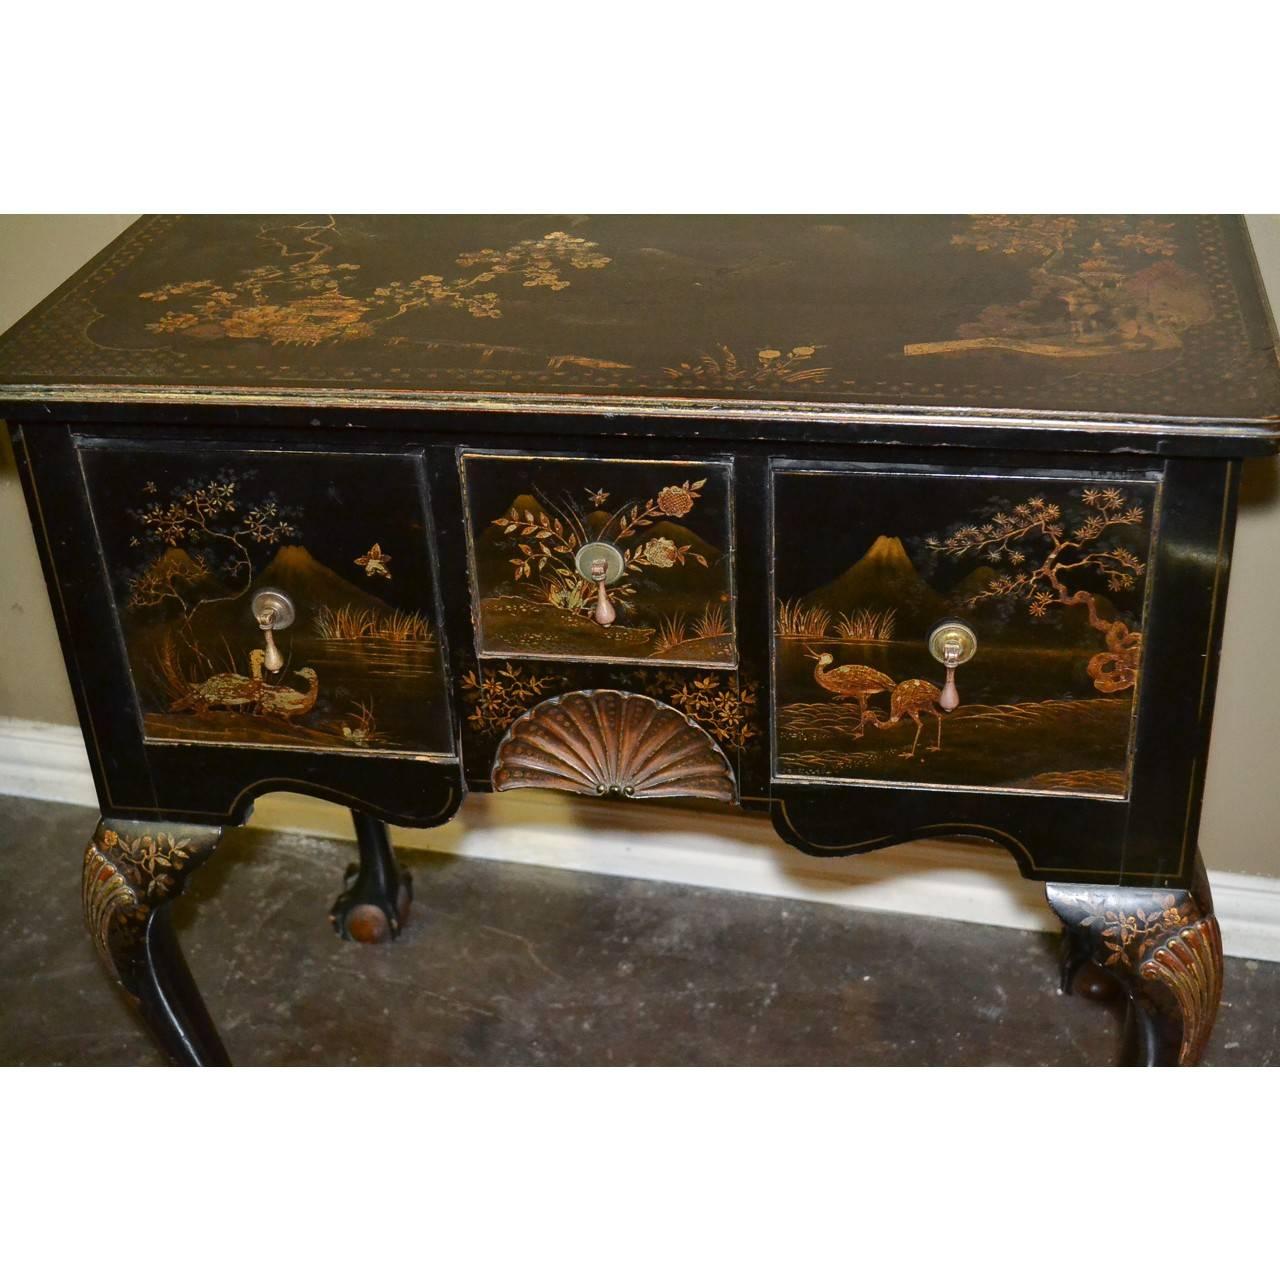 This striking English lowboy is a design must have, circa 1830.